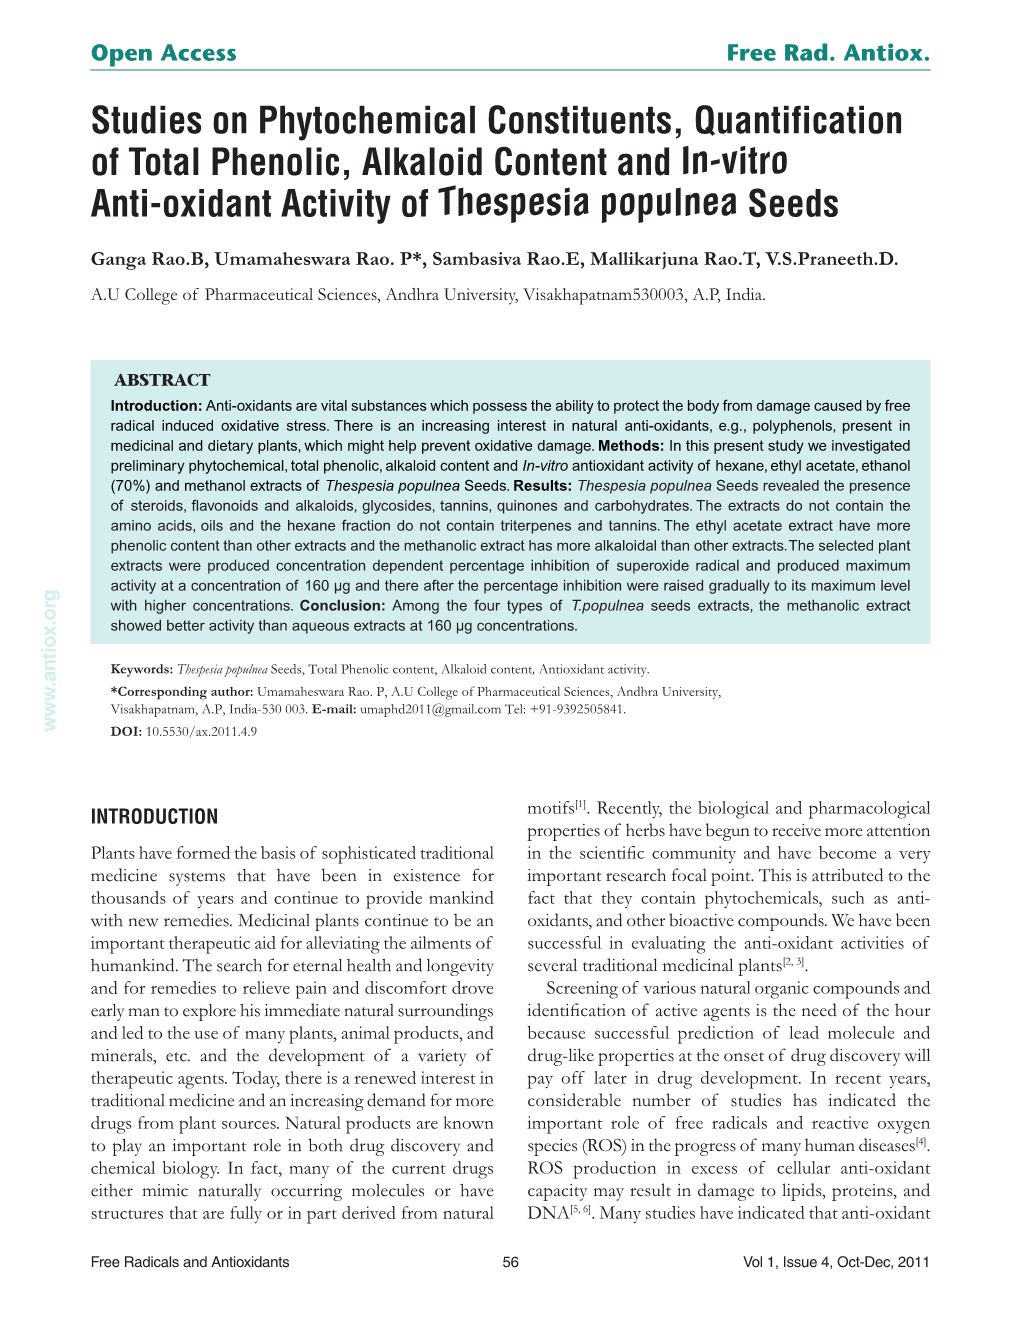 Studies on Phytochemical Constituents, Quantification of Total Phenolic, Alkaloid Content and In-Vitro Anti-Oxidant Activity of Thespesia Populnea Seeds